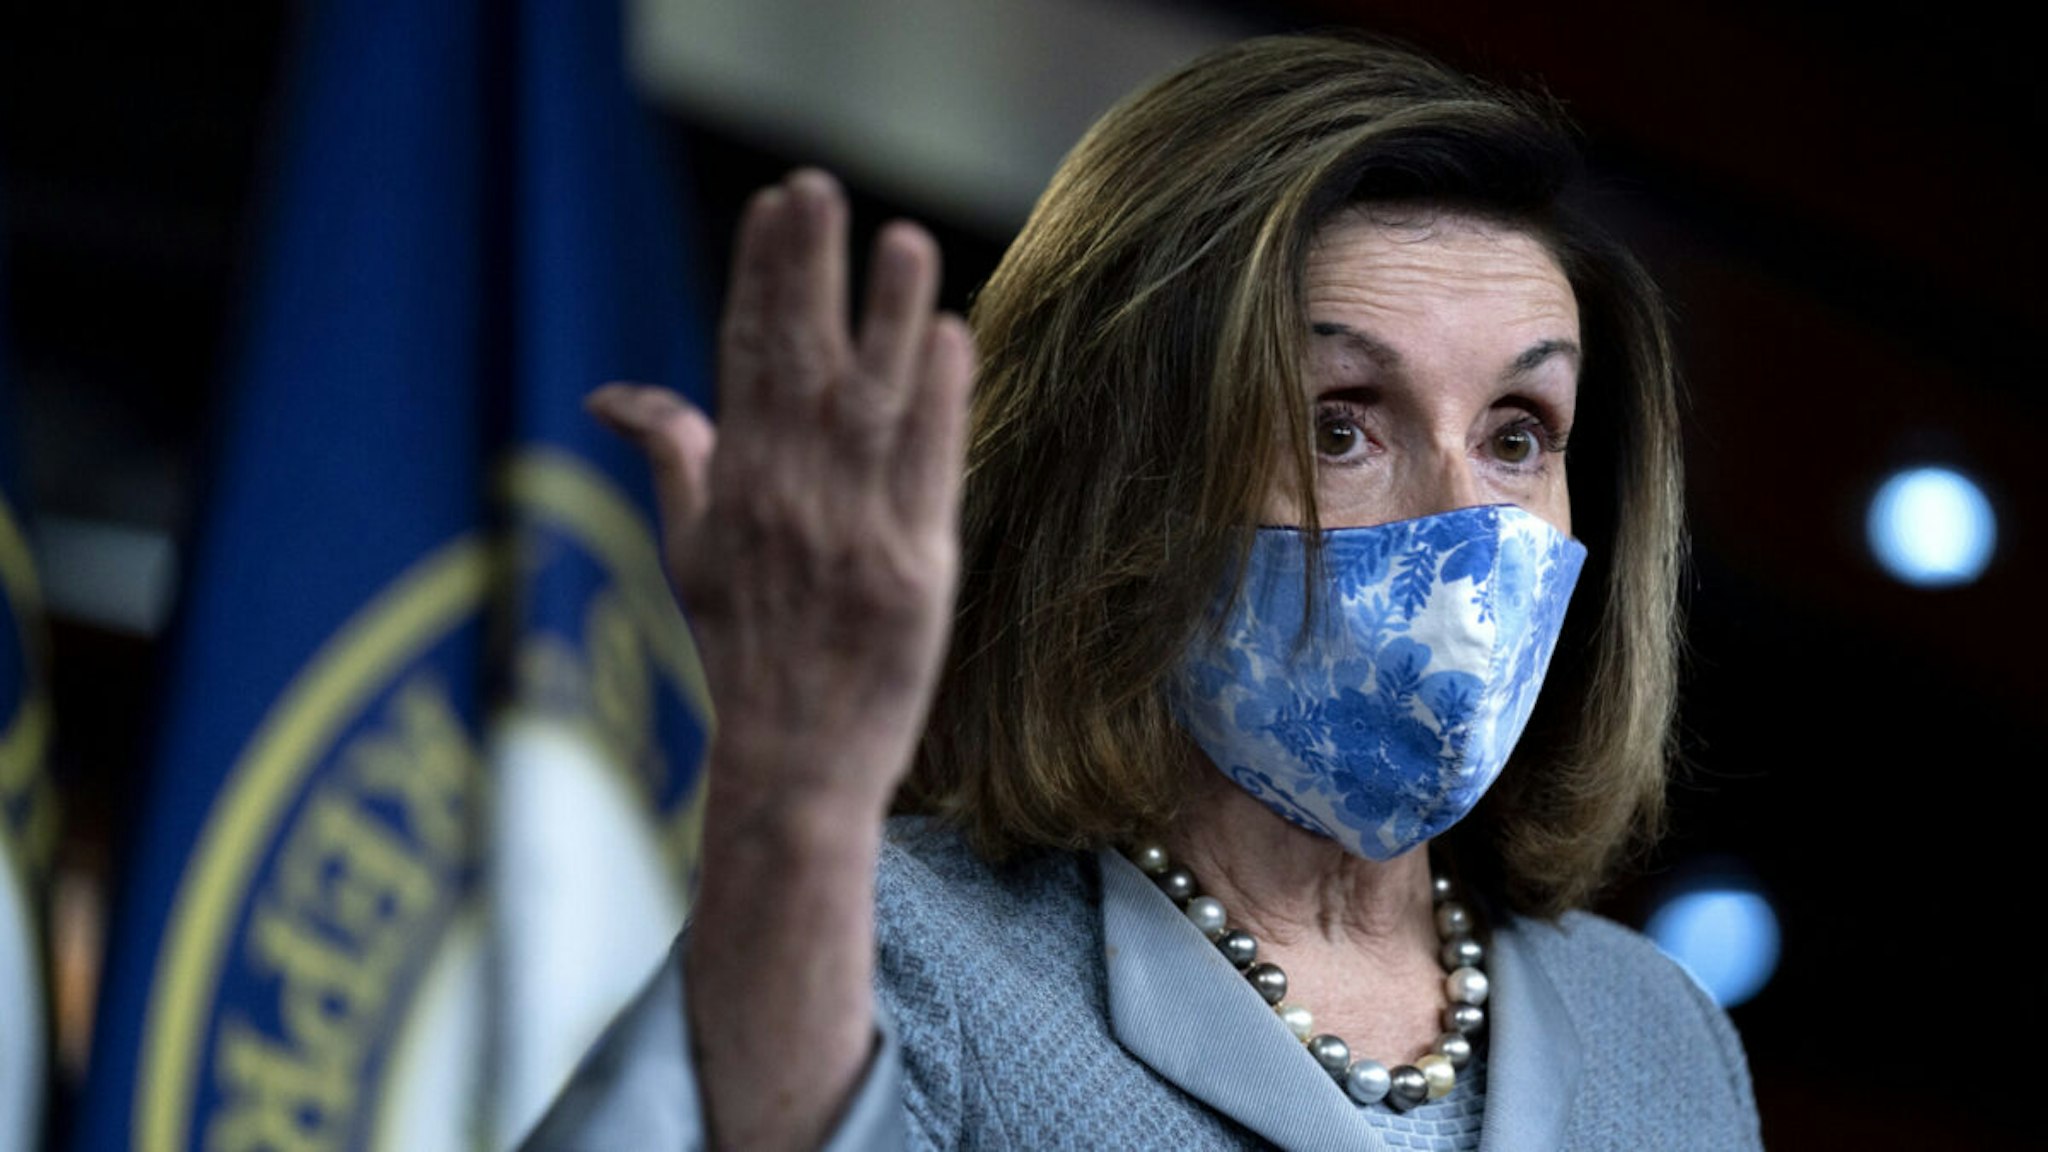 U.S. House Speaker Nancy Pelosi, a Democrat from California, wears a protective mask while speaking during a news conference at the U.S. Capitol in Washington, D.C., U.S., on Thursday, Oct. 29, 2020.